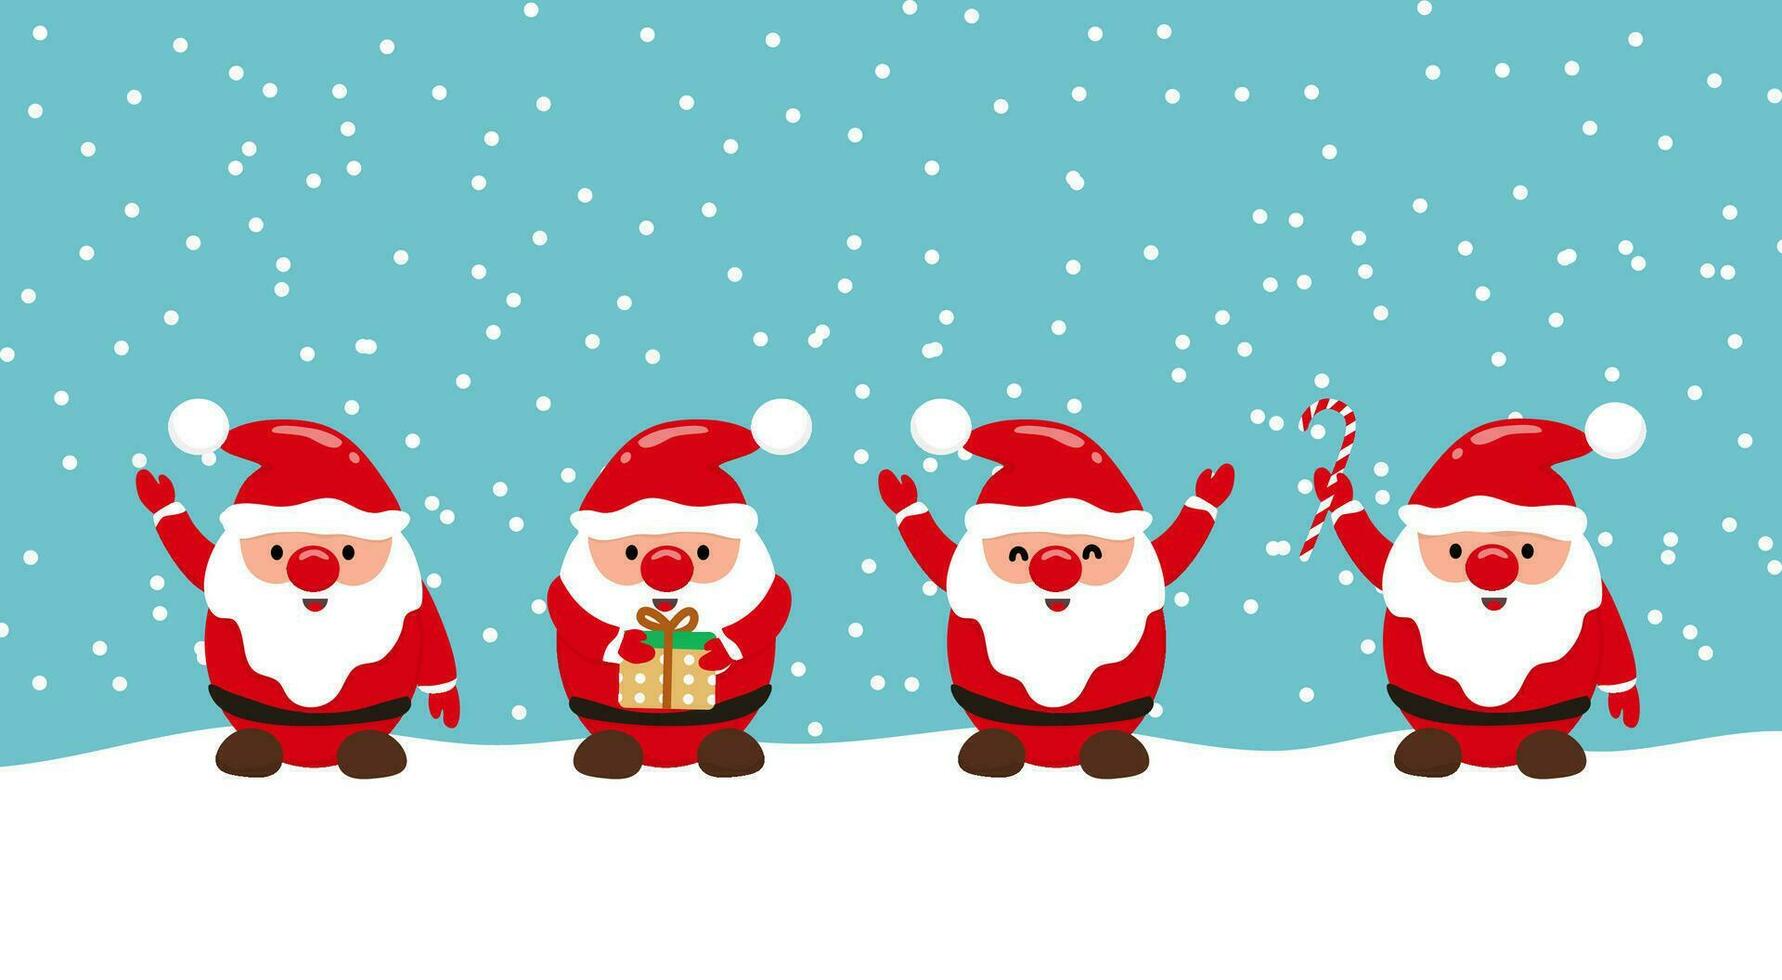 Cartoon Santa Claus with snow background and gift boxes vector